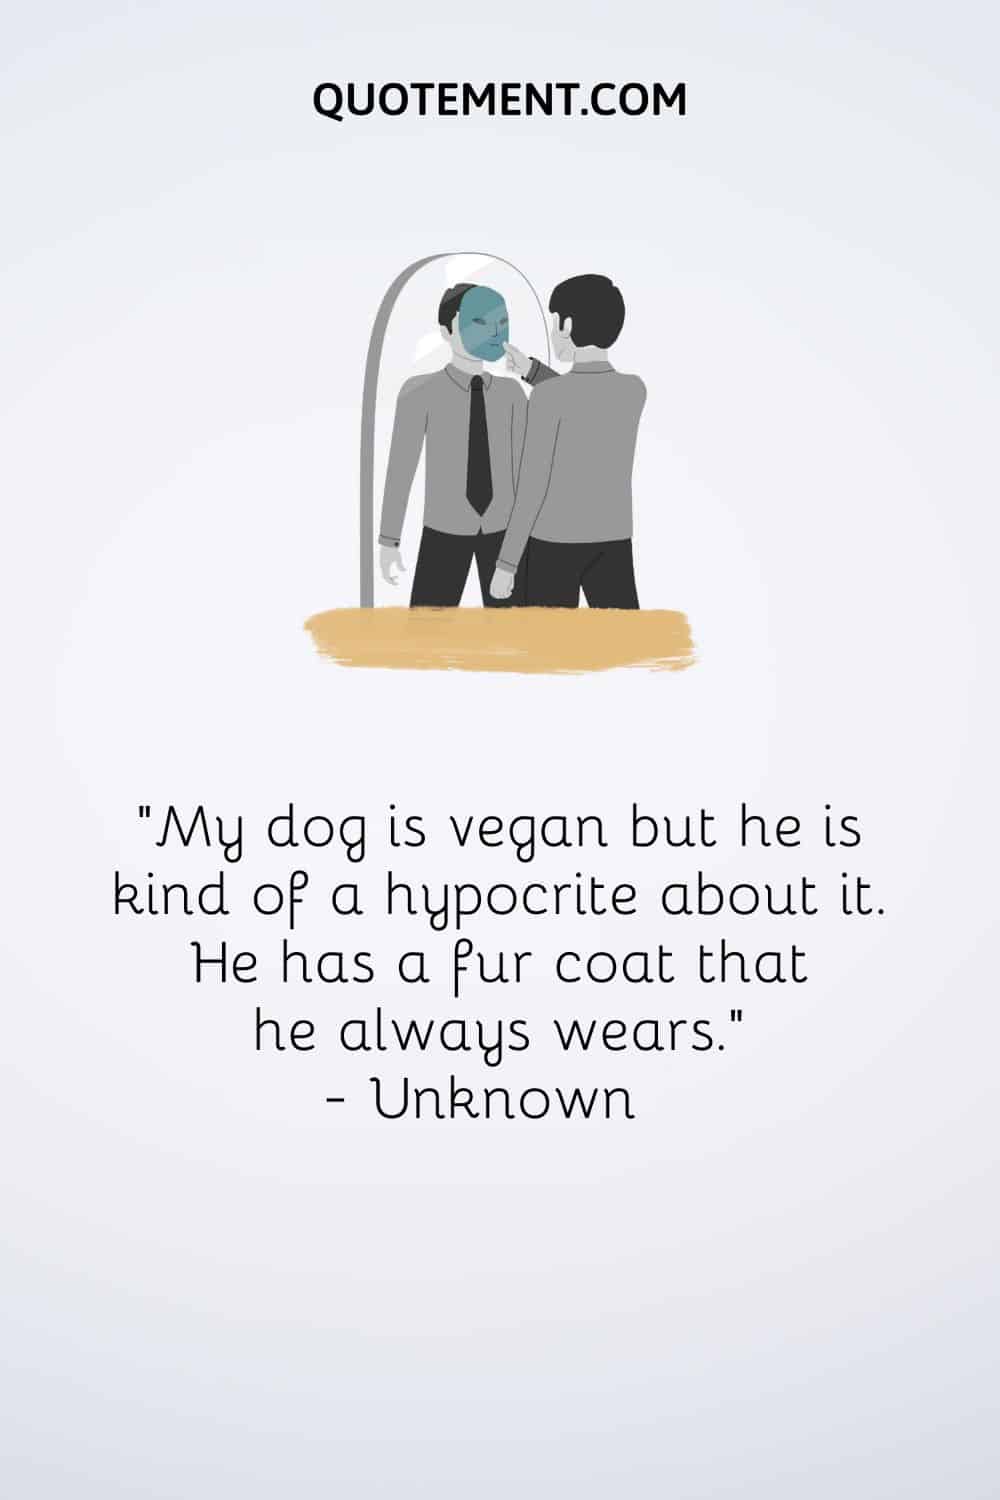 “My dog is vegan but he is kind of a hypocrite about it. He has a fur coat that he always wears.” — Unknown